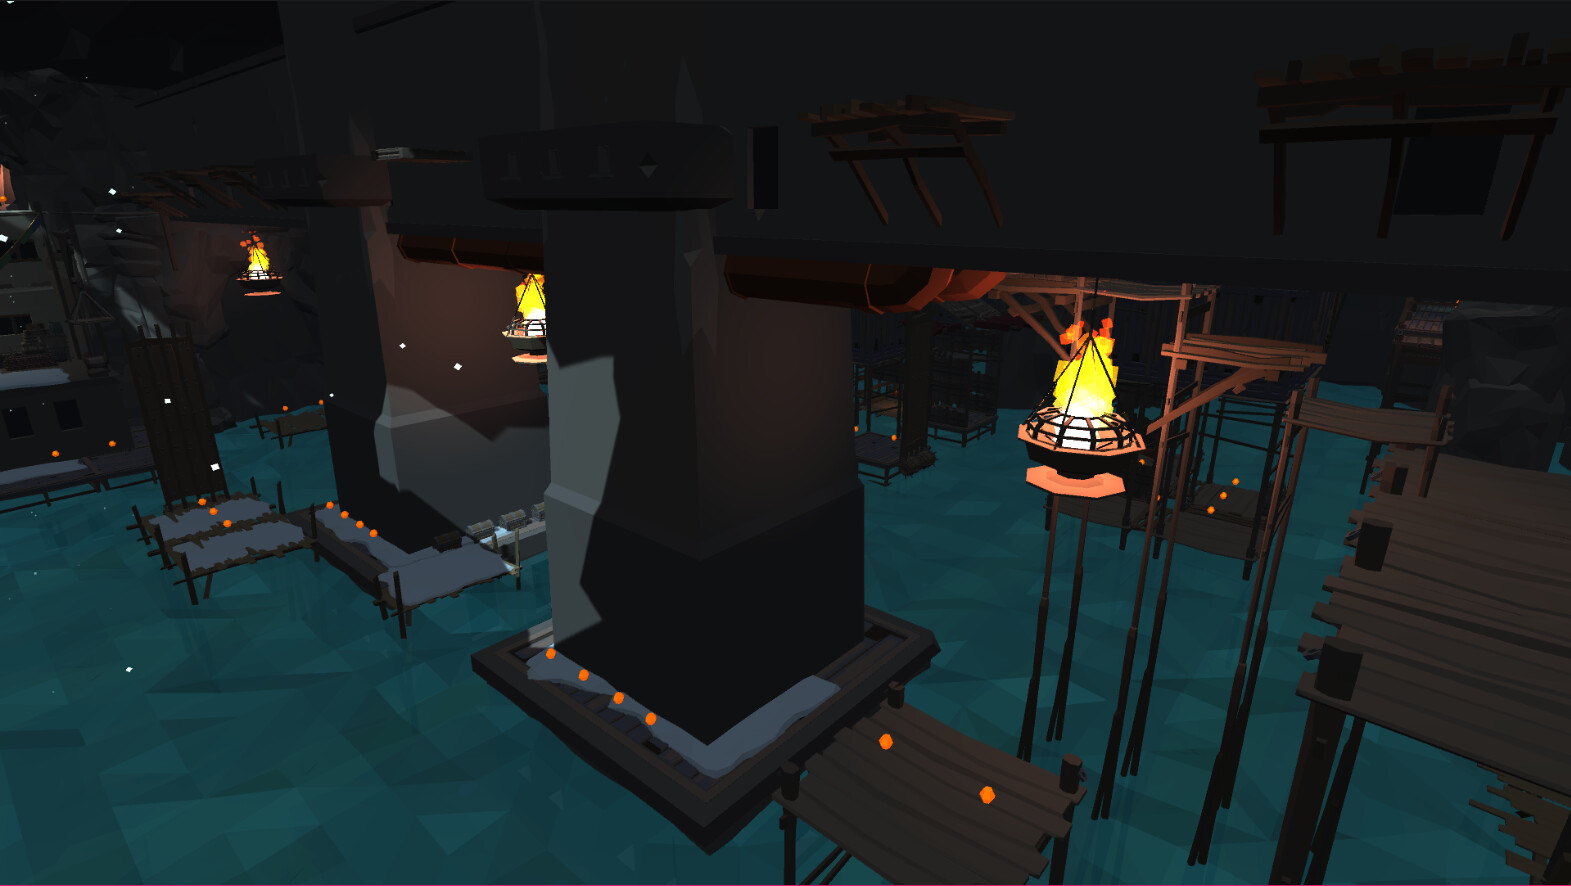 A view showcasing the central section of the cavern area of the level. The player crosses these struts at the base when returning from opening the dam access point.